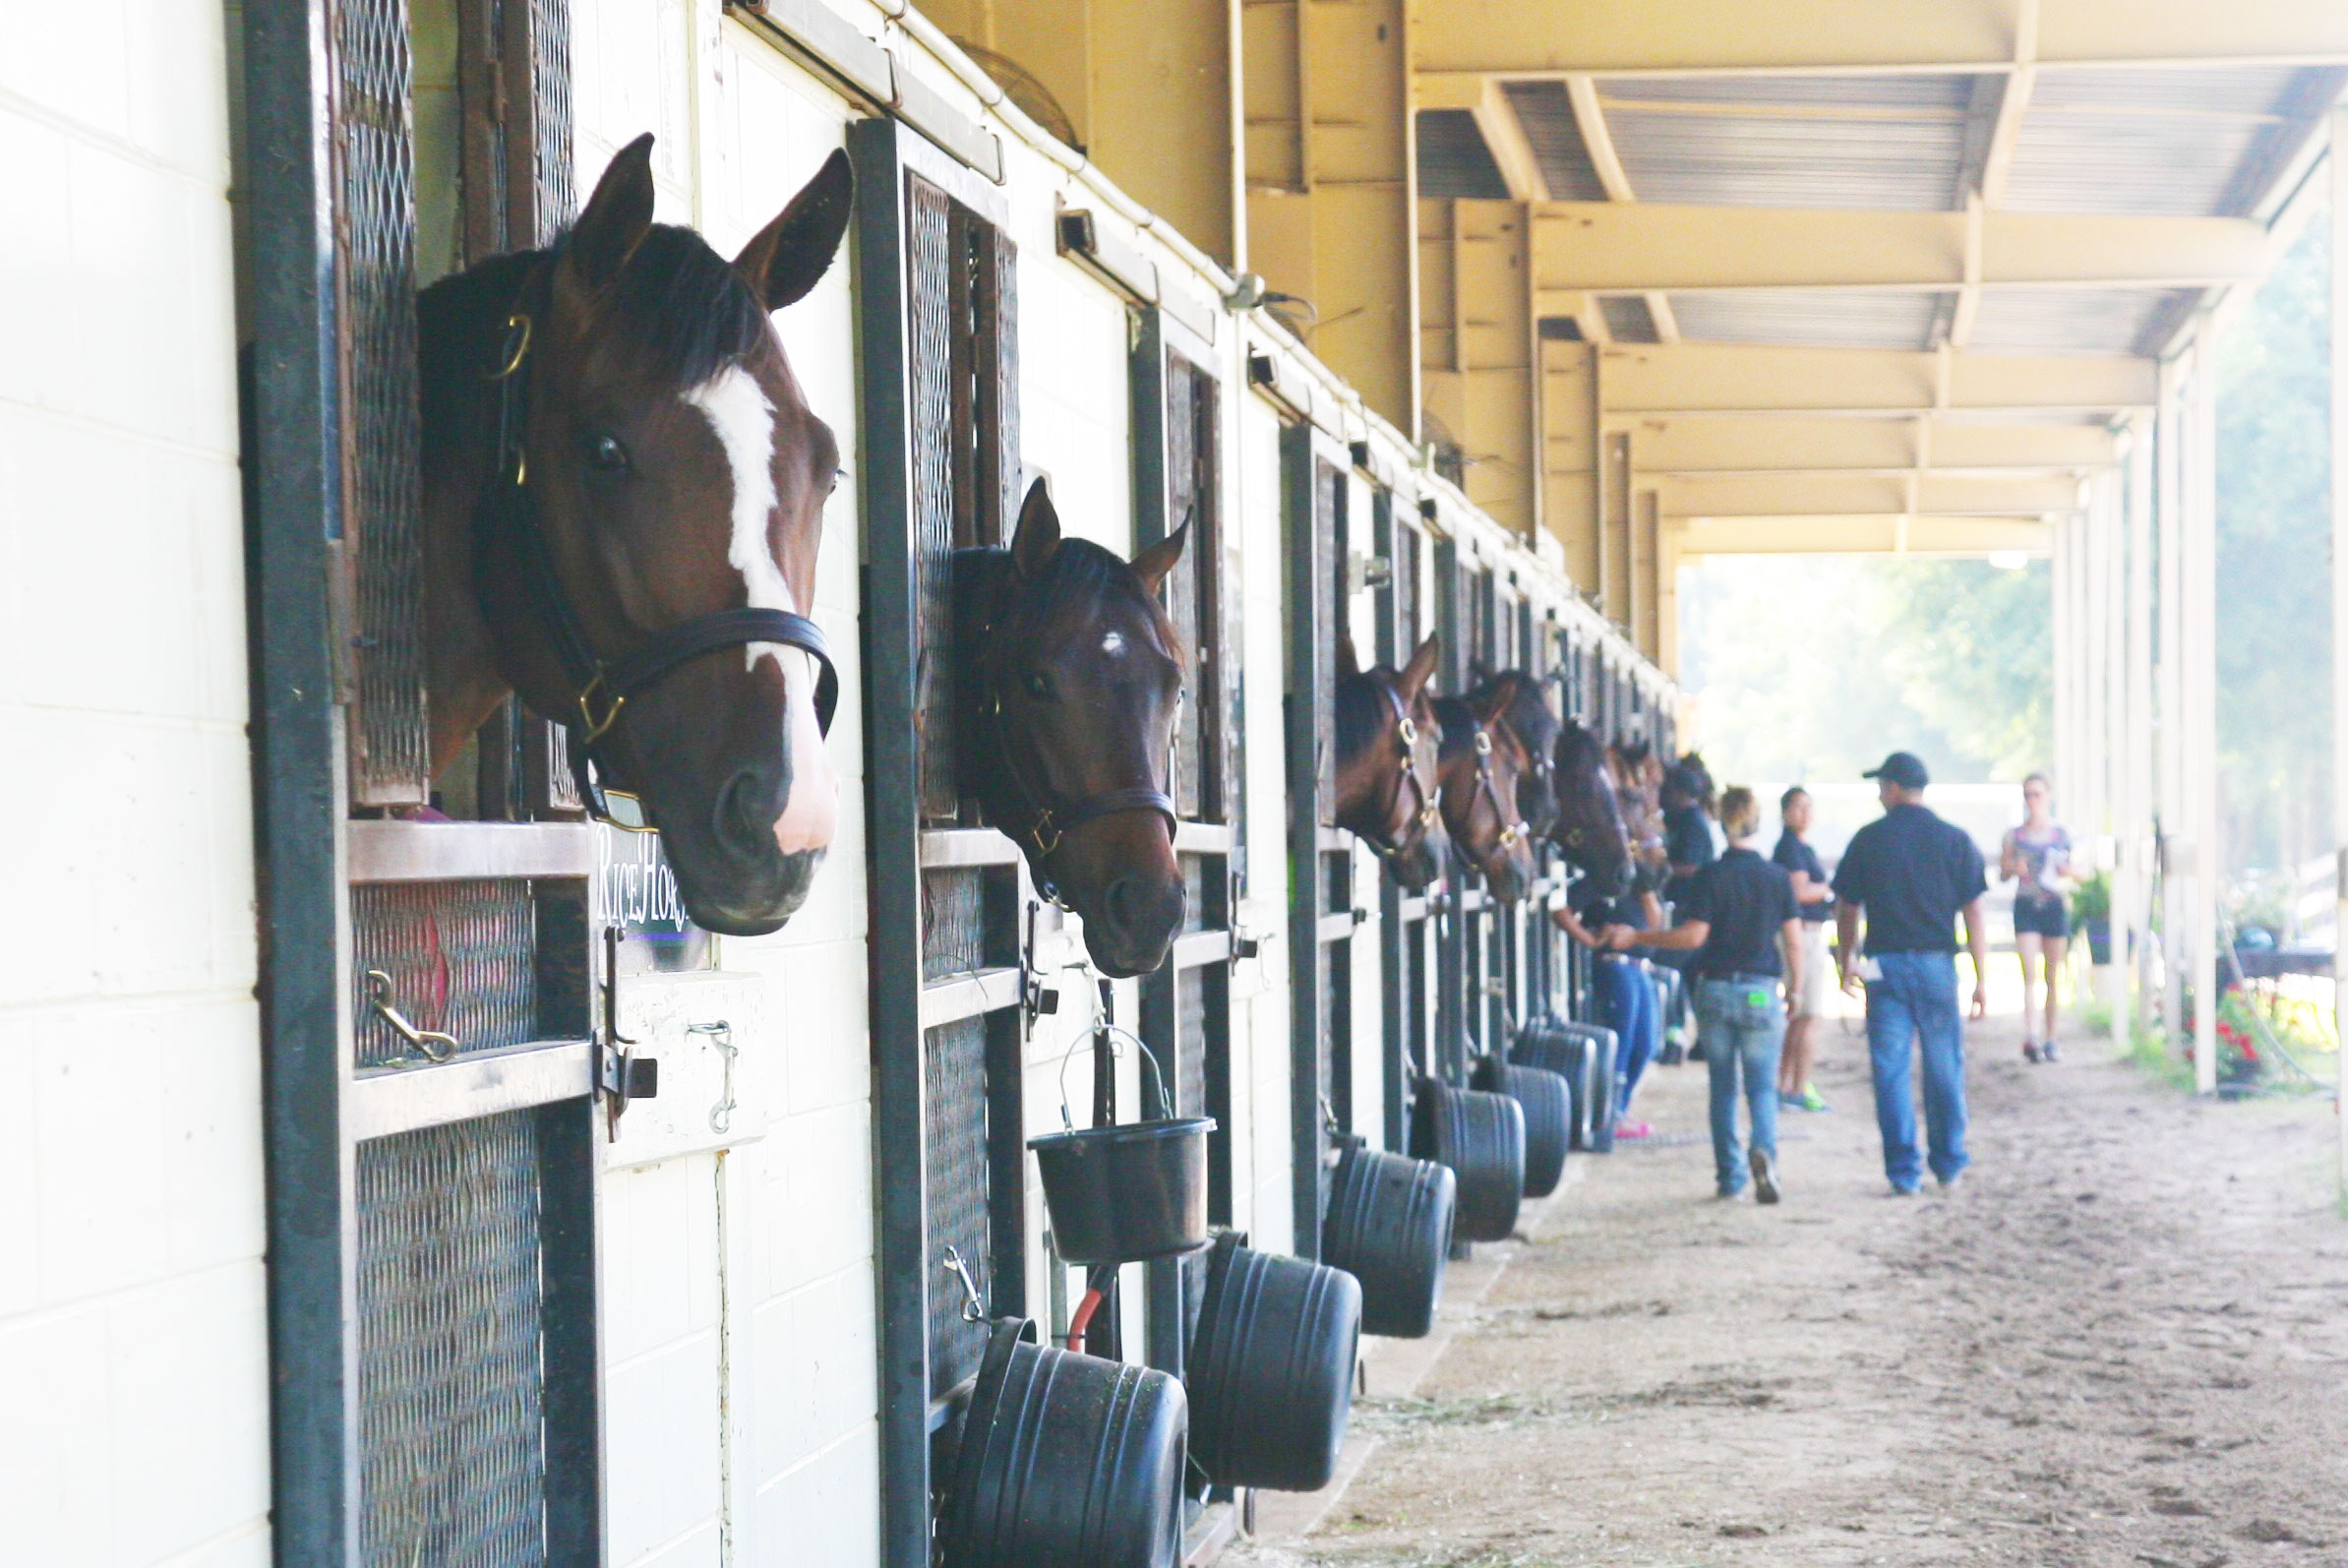 Horses at the stable at OBS